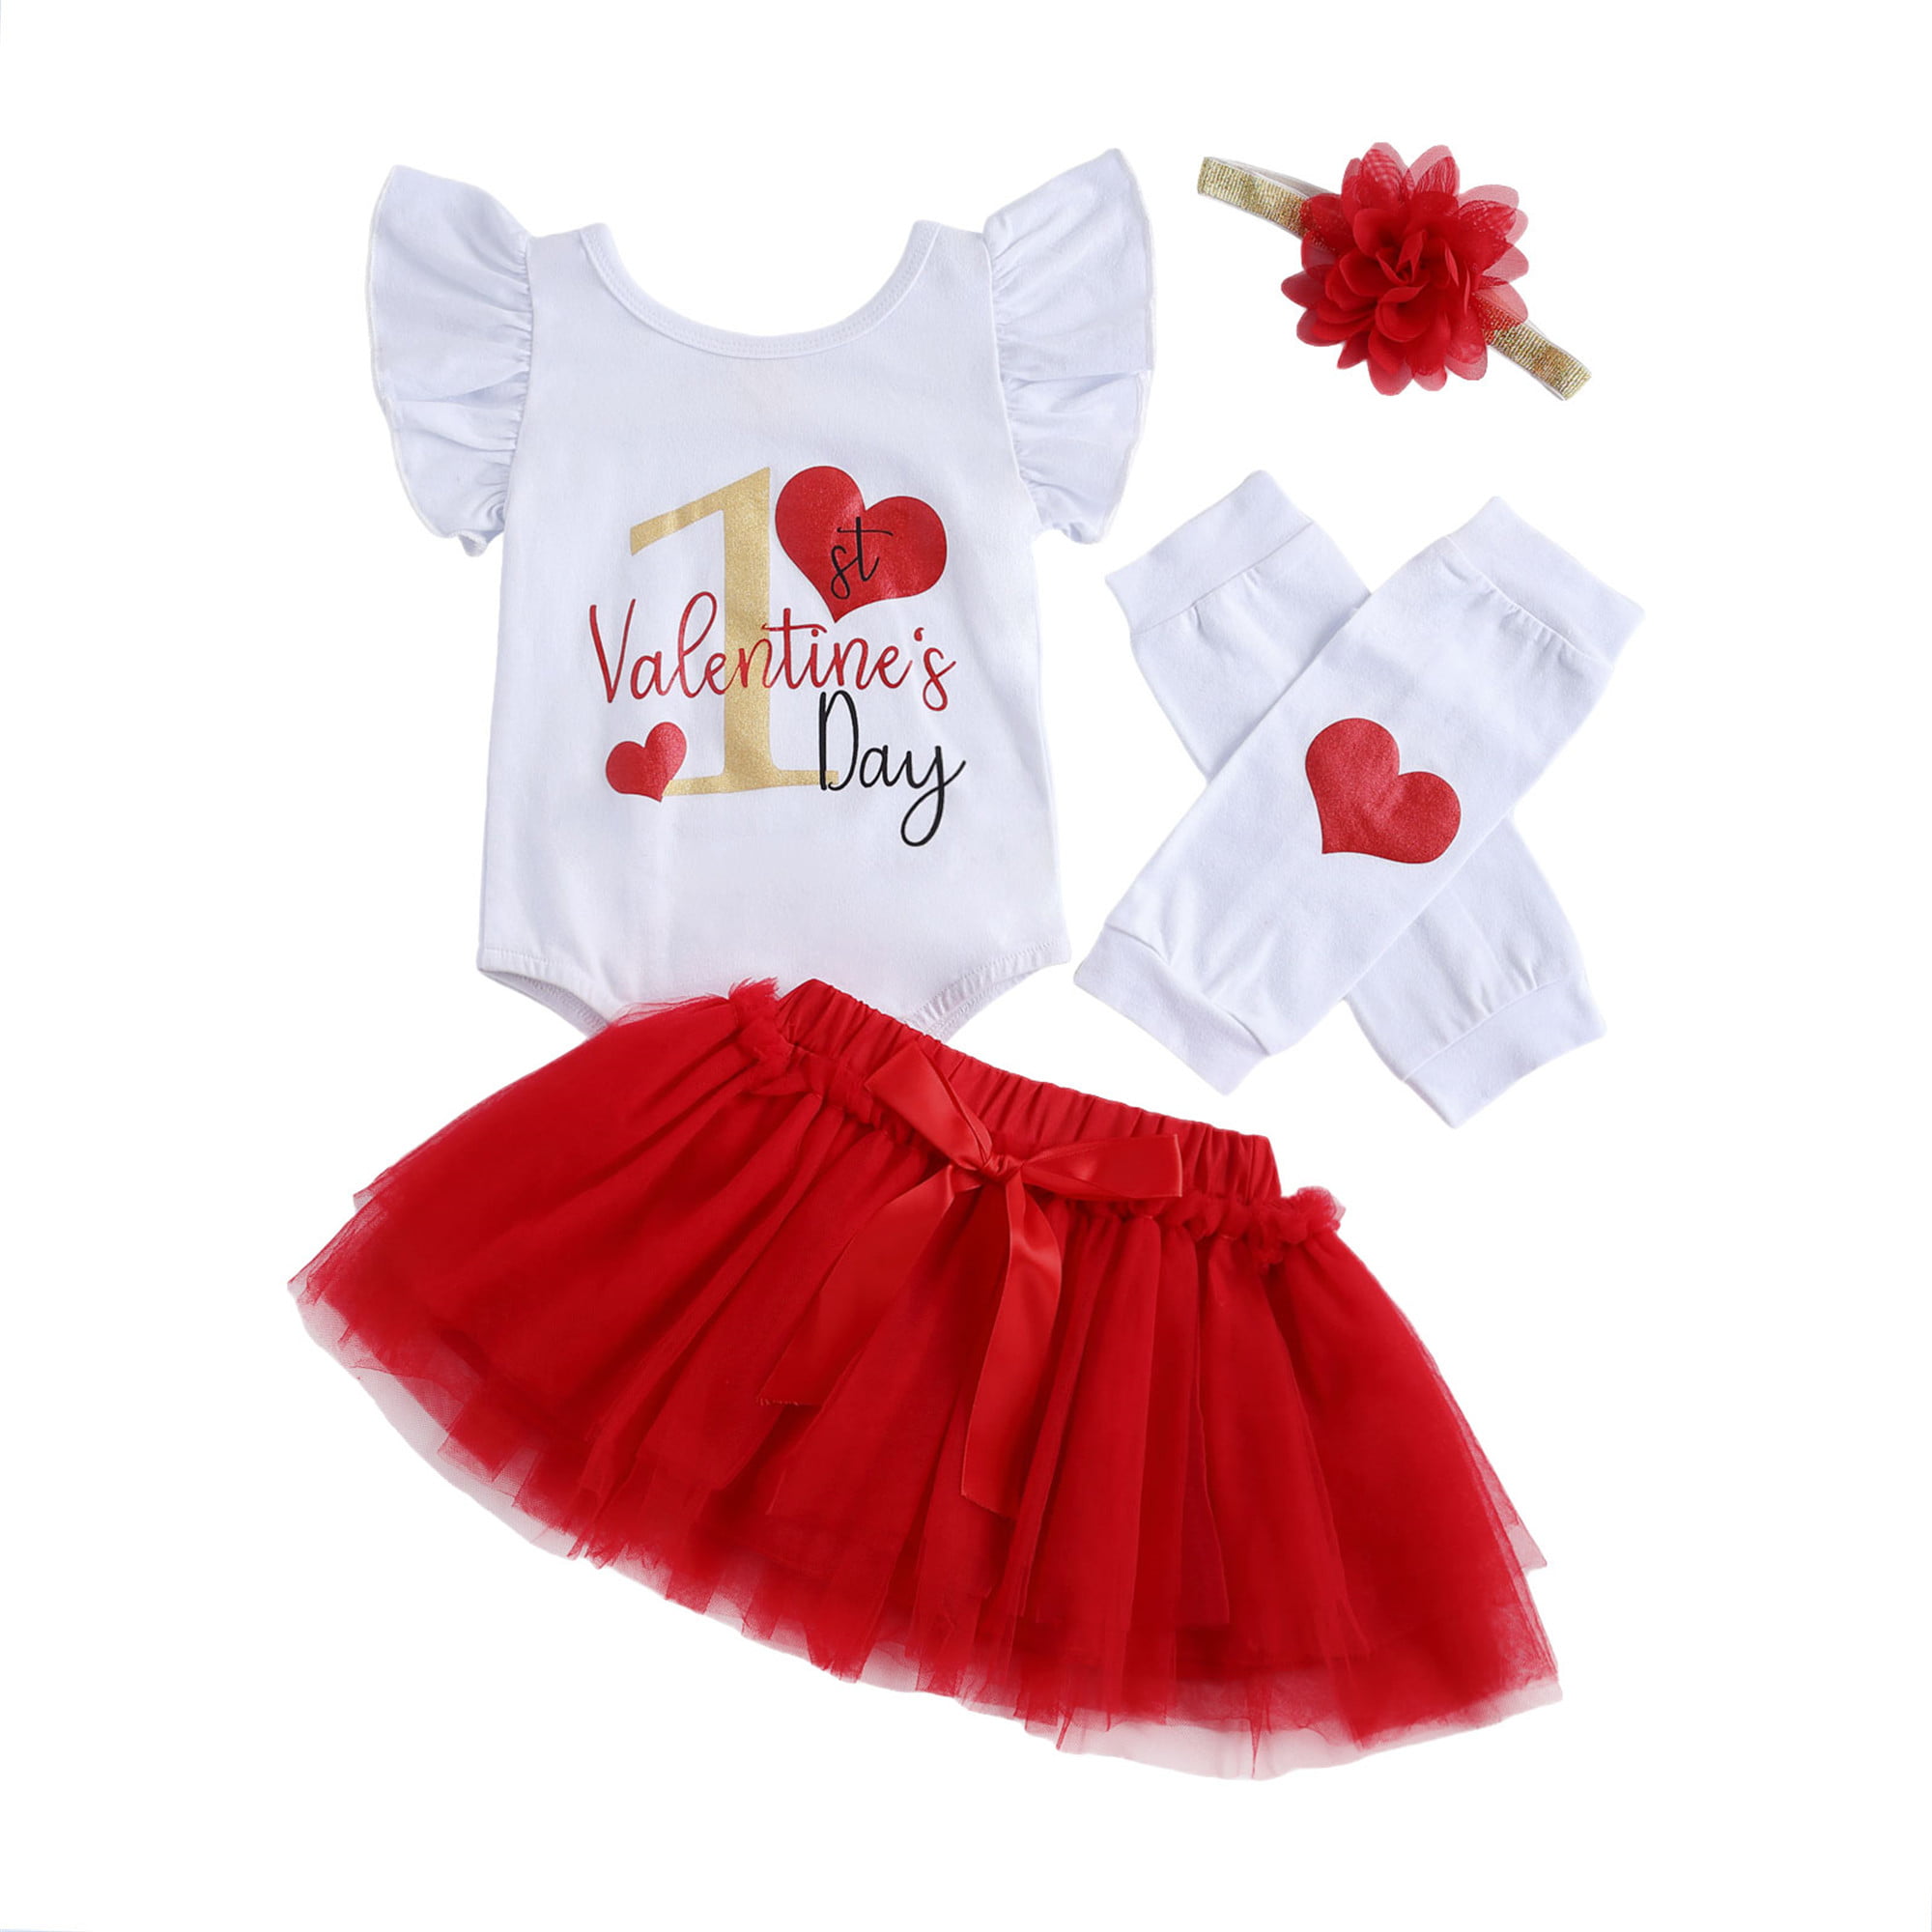 NWT Gap Baby Girl's 2 Pc Outfit Heart Tulle Top/Leggings 6-12M New Free Shipping 